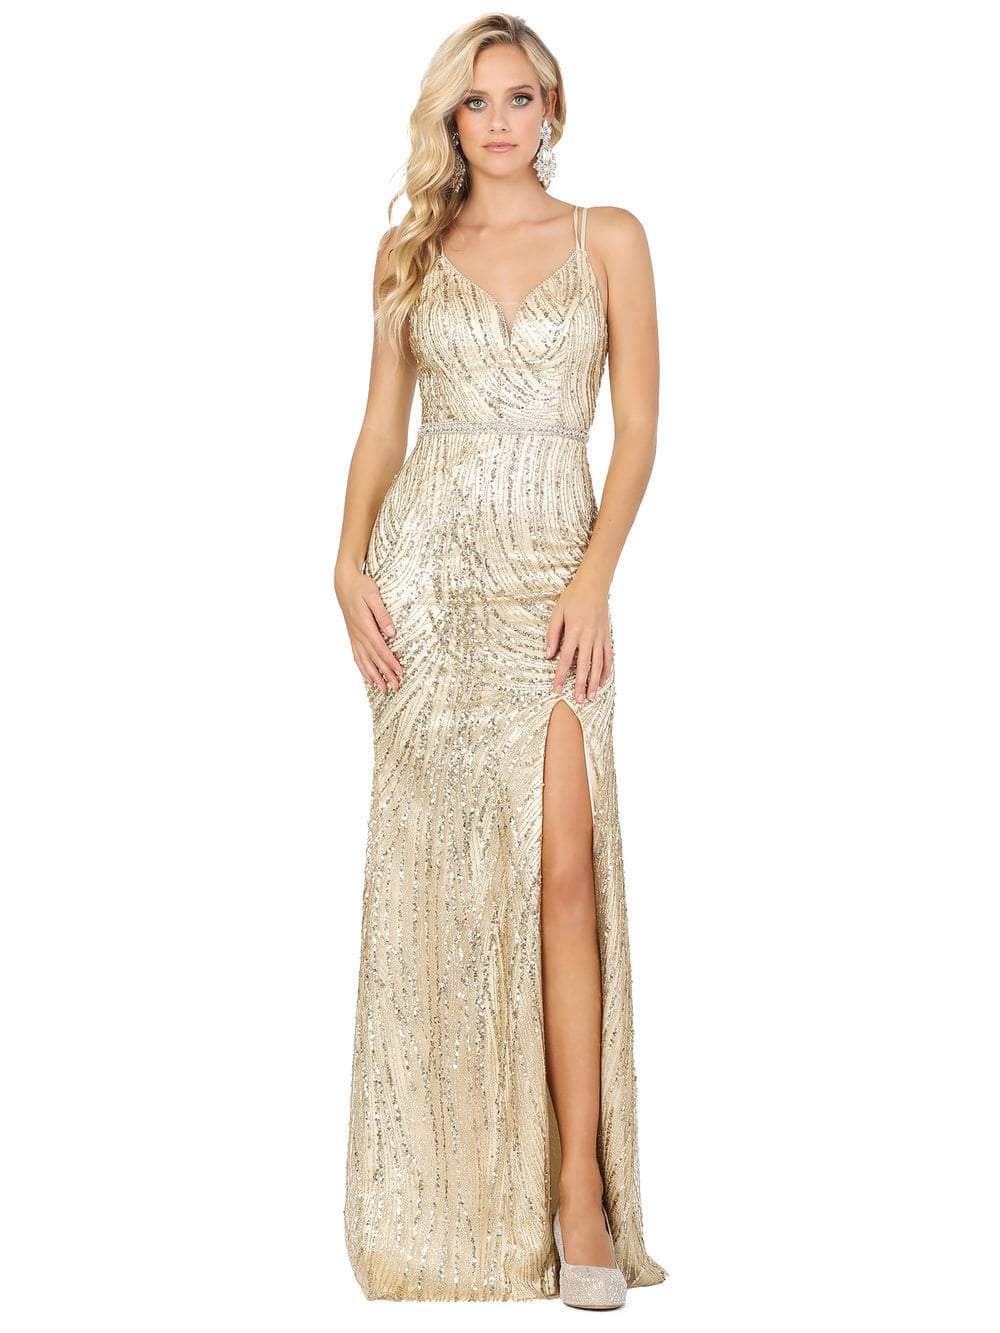 Image of Dancing Queen - 2826 Glitter Plunging V Neck Gown with Slit